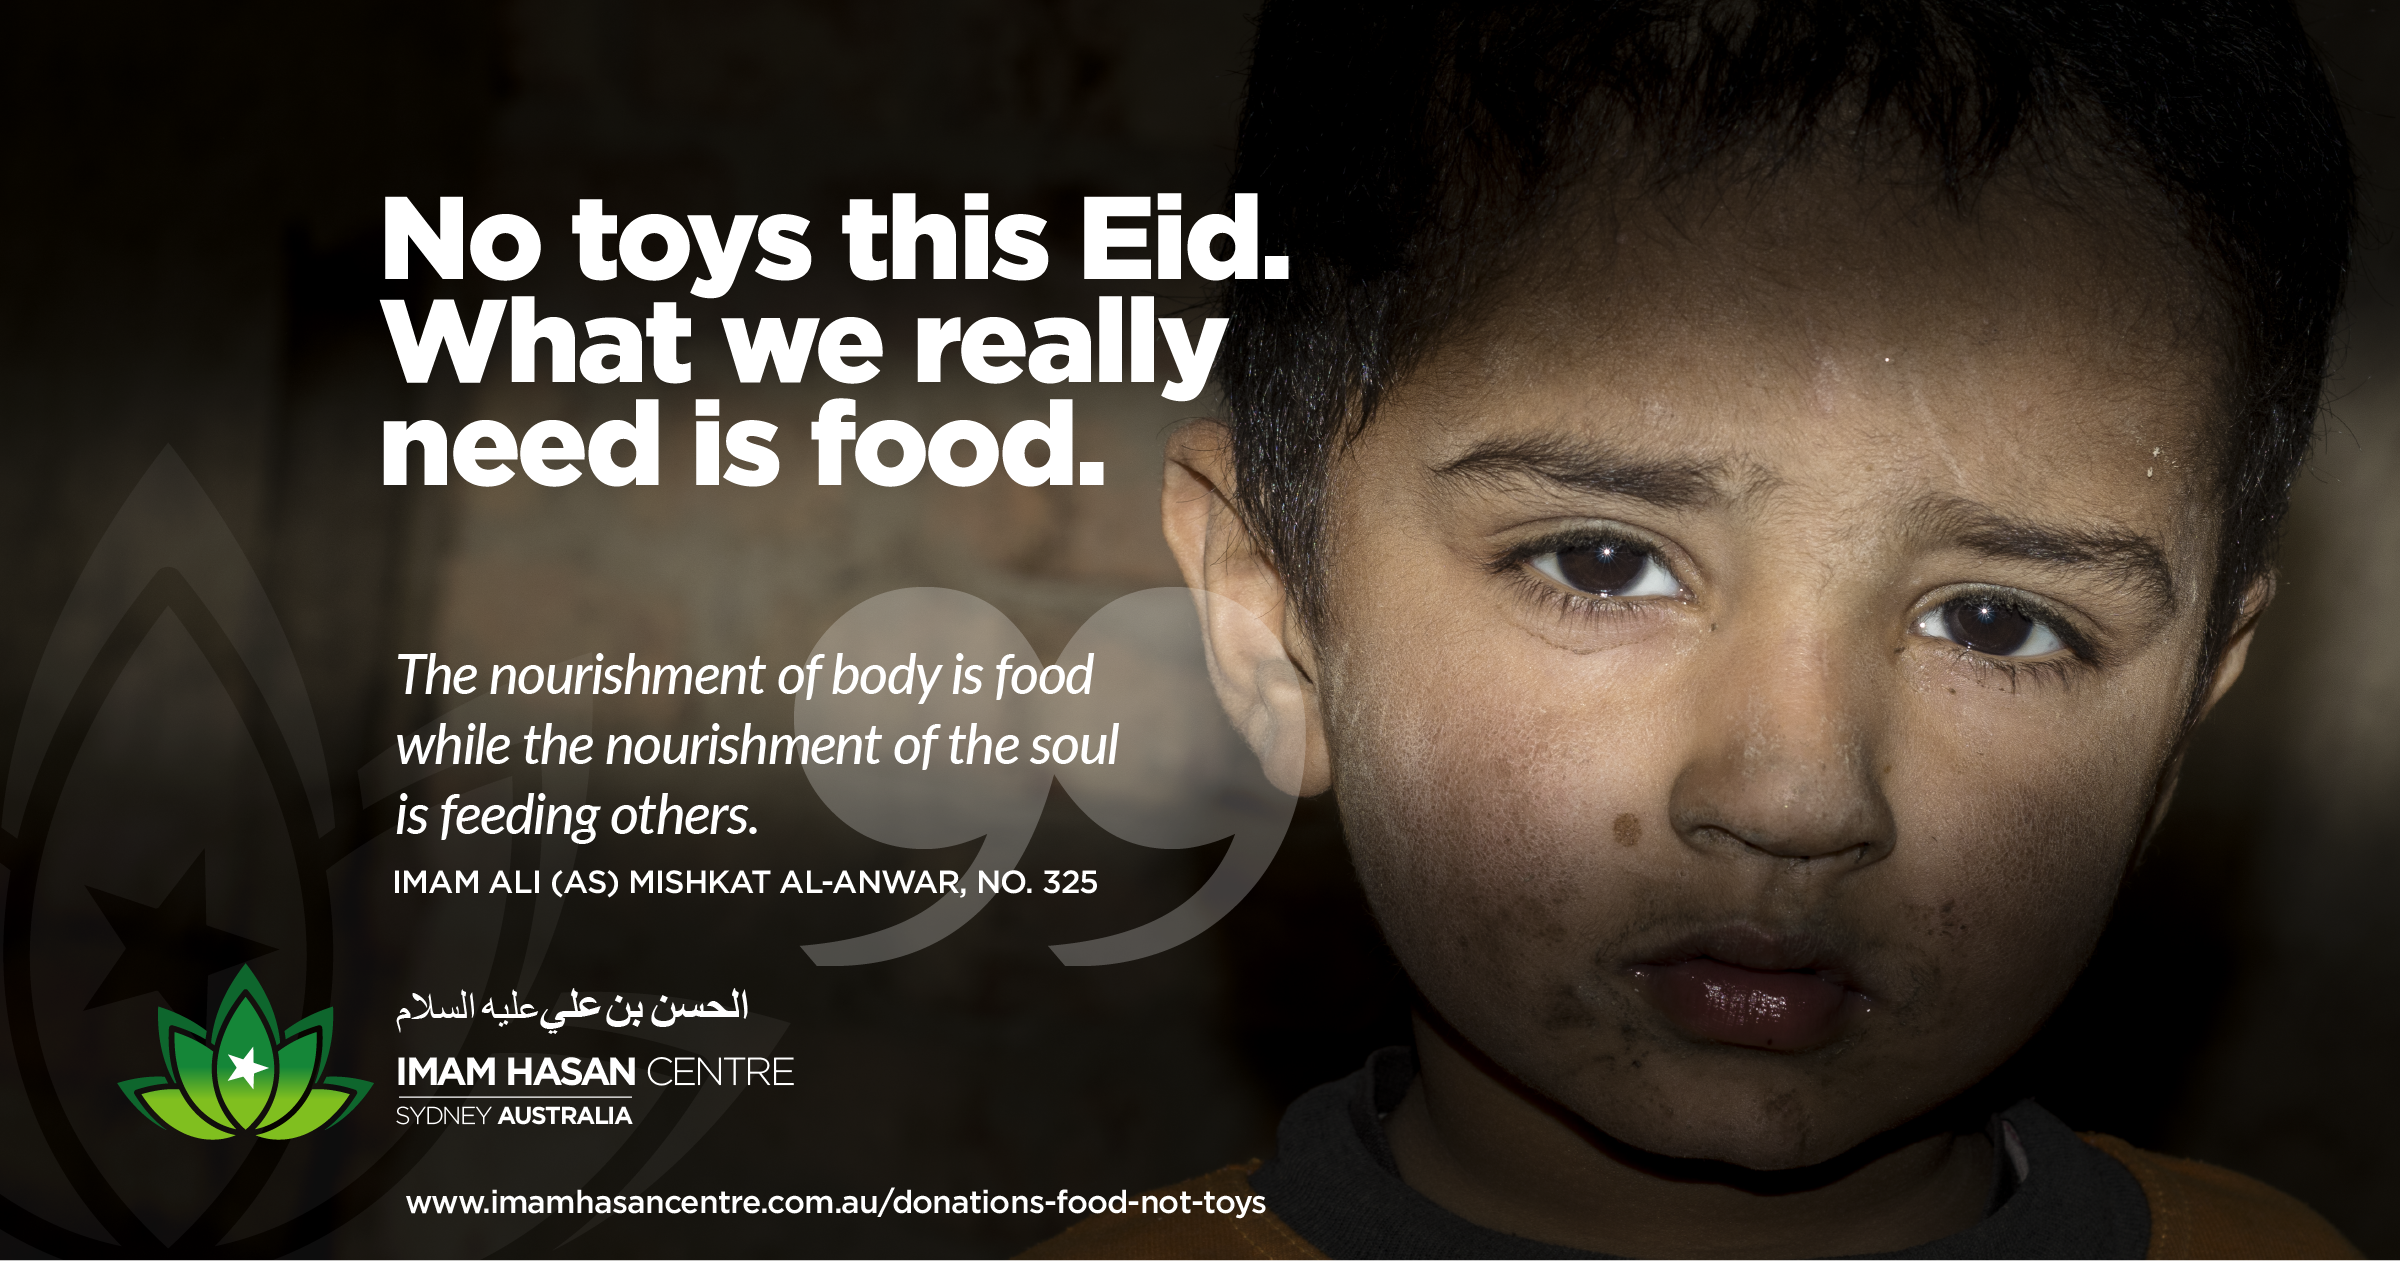 FOOD NOT TOYS – PLEASE DONATE IF YOU CAN SO FURTHER FOOD PARCELS CAN BE SENT